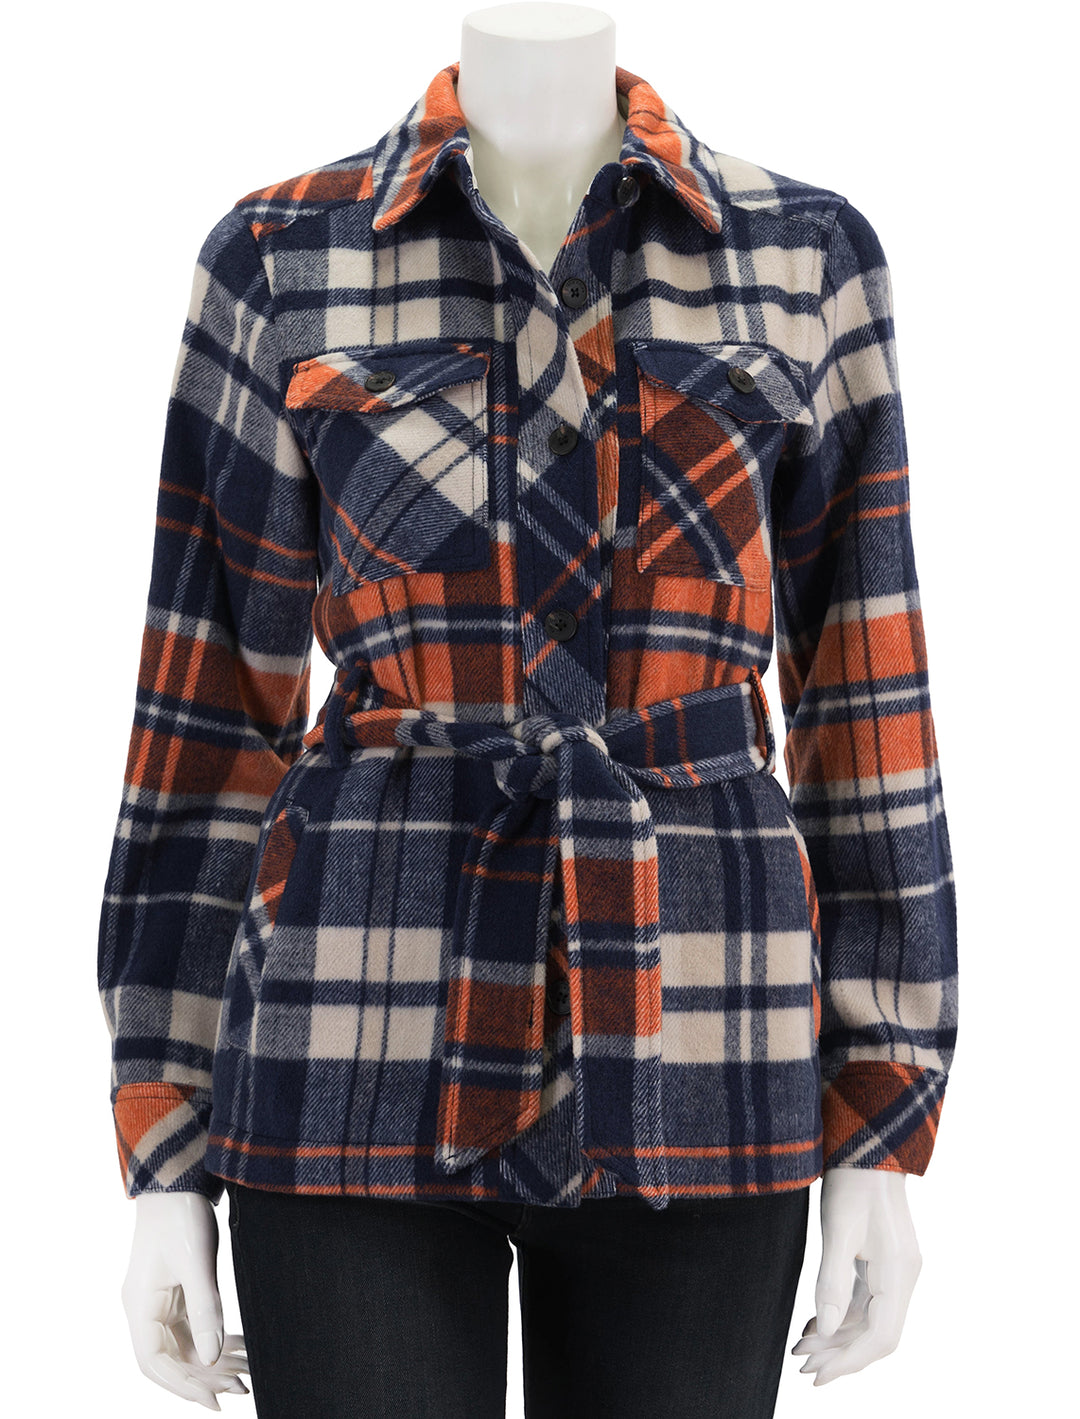 Front view of Scotch & Soda's Wool Bend Checked Belted Overshirt.